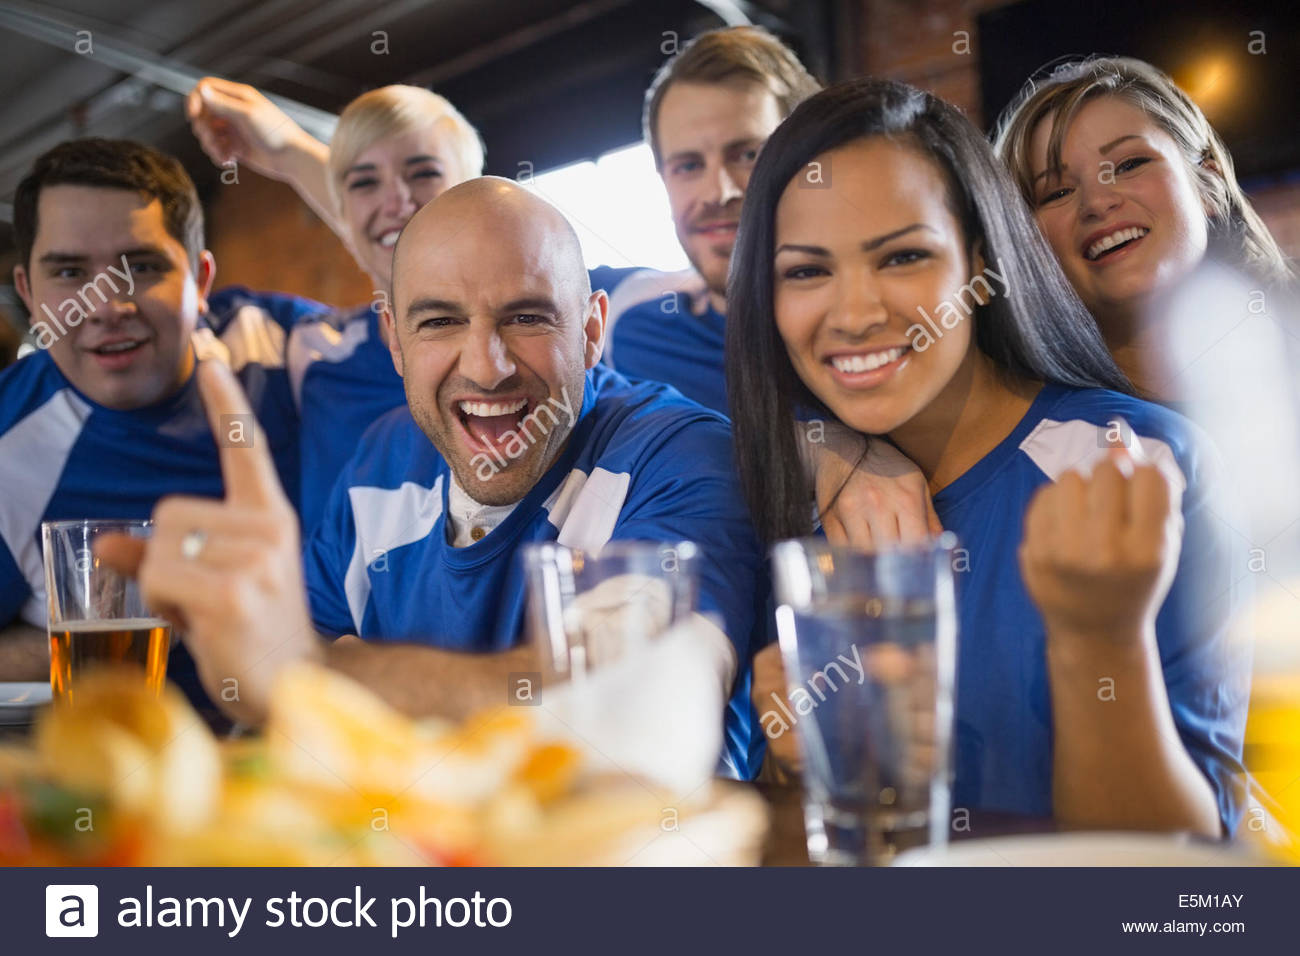 Sports fans cheering in pub Stock Photo